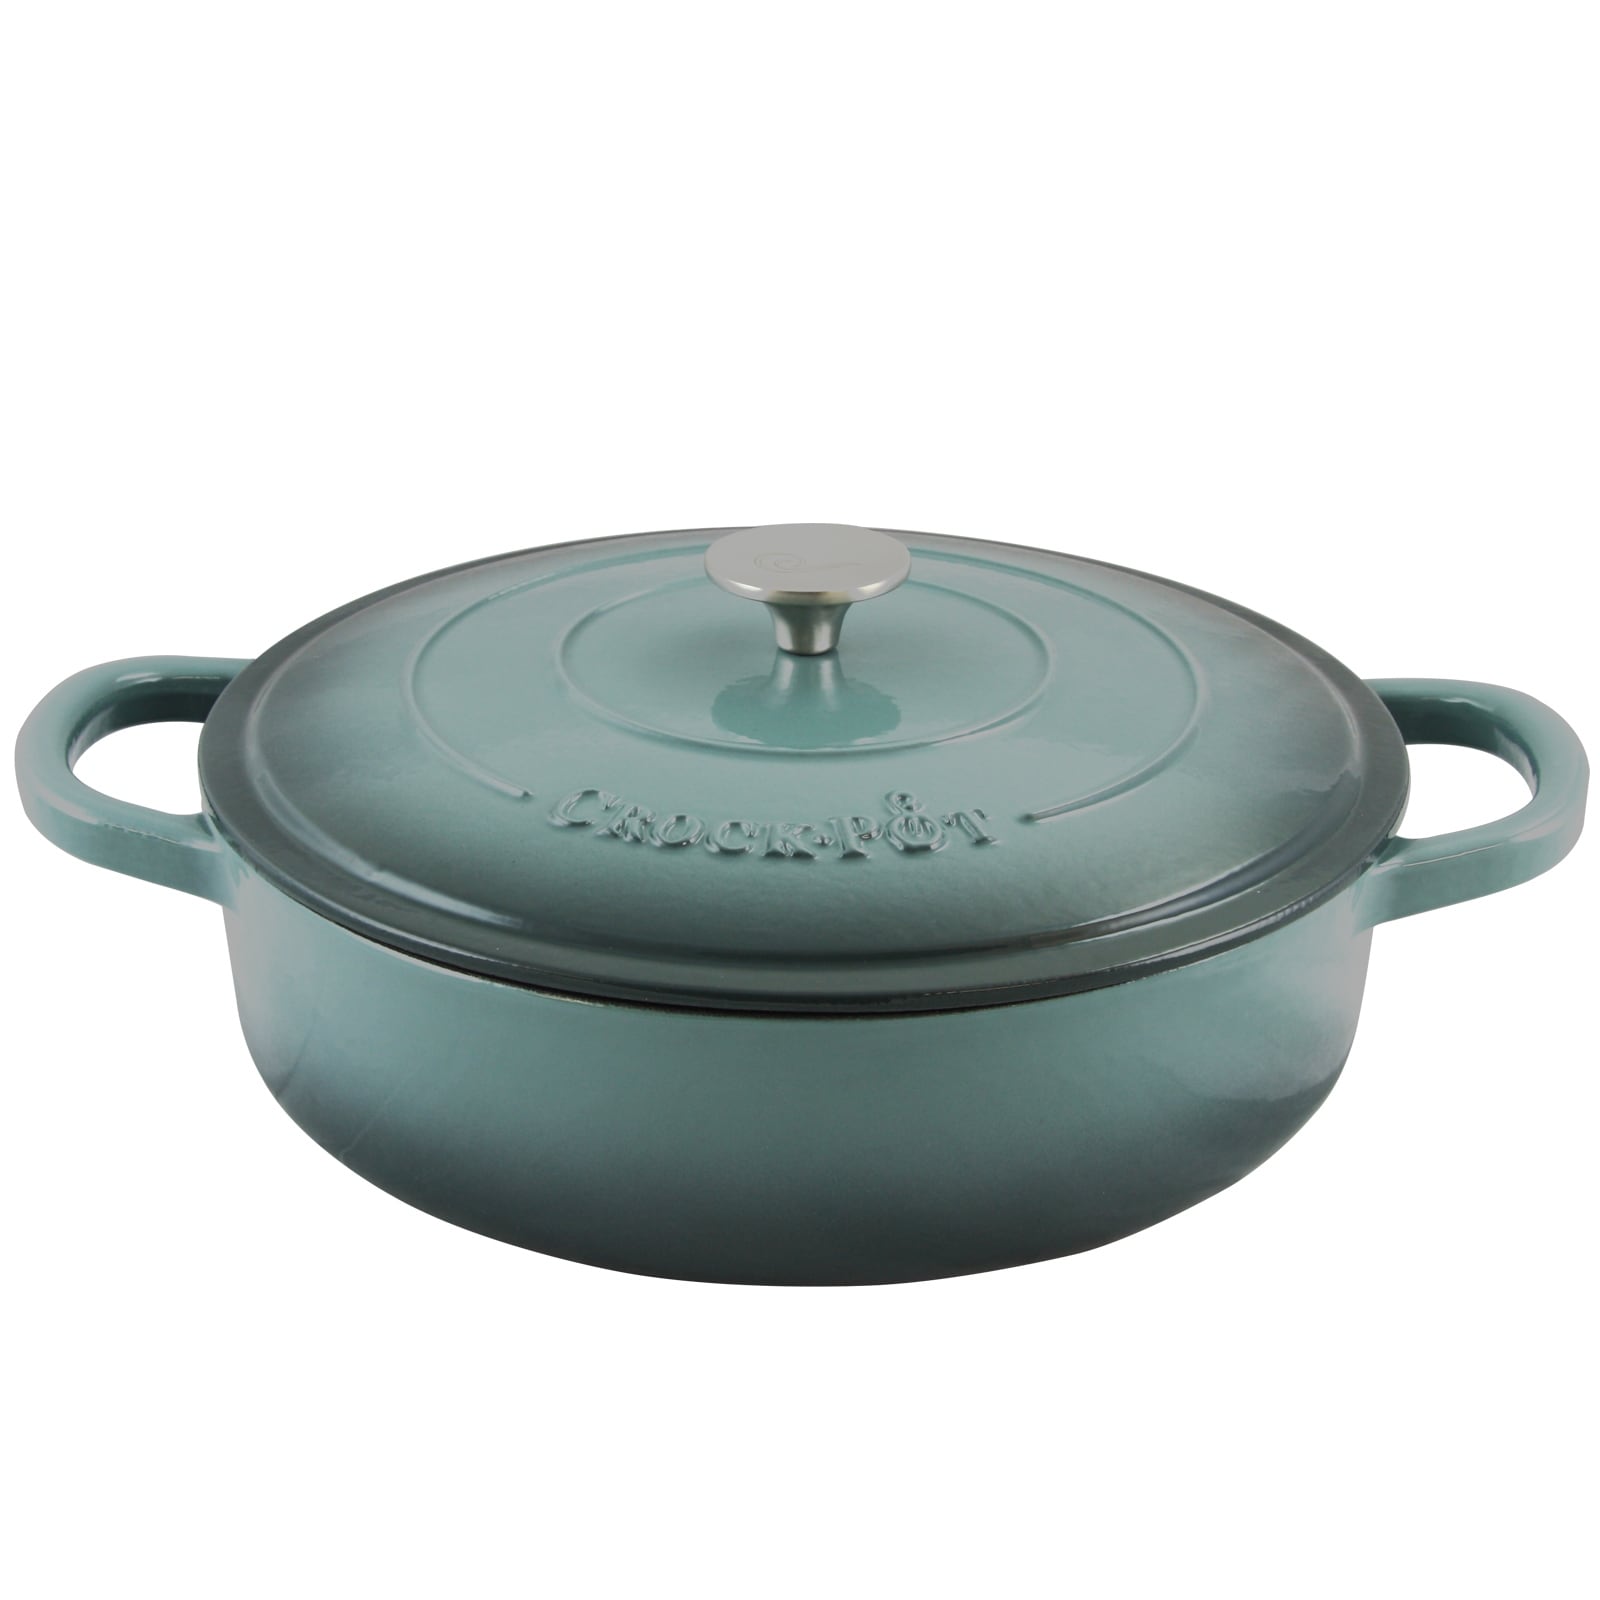 https://ak1.ostkcdn.com/images/products/is/images/direct/3f53d12b9984fad943e48ff952cd64ff0d28fbd1/Crock-Pot-Artisan-Enameled-5-Quart-Cast-Iron-Round-Braiser-Pan-with-Self-Basting-Lid-in-Slate-Grey.jpg